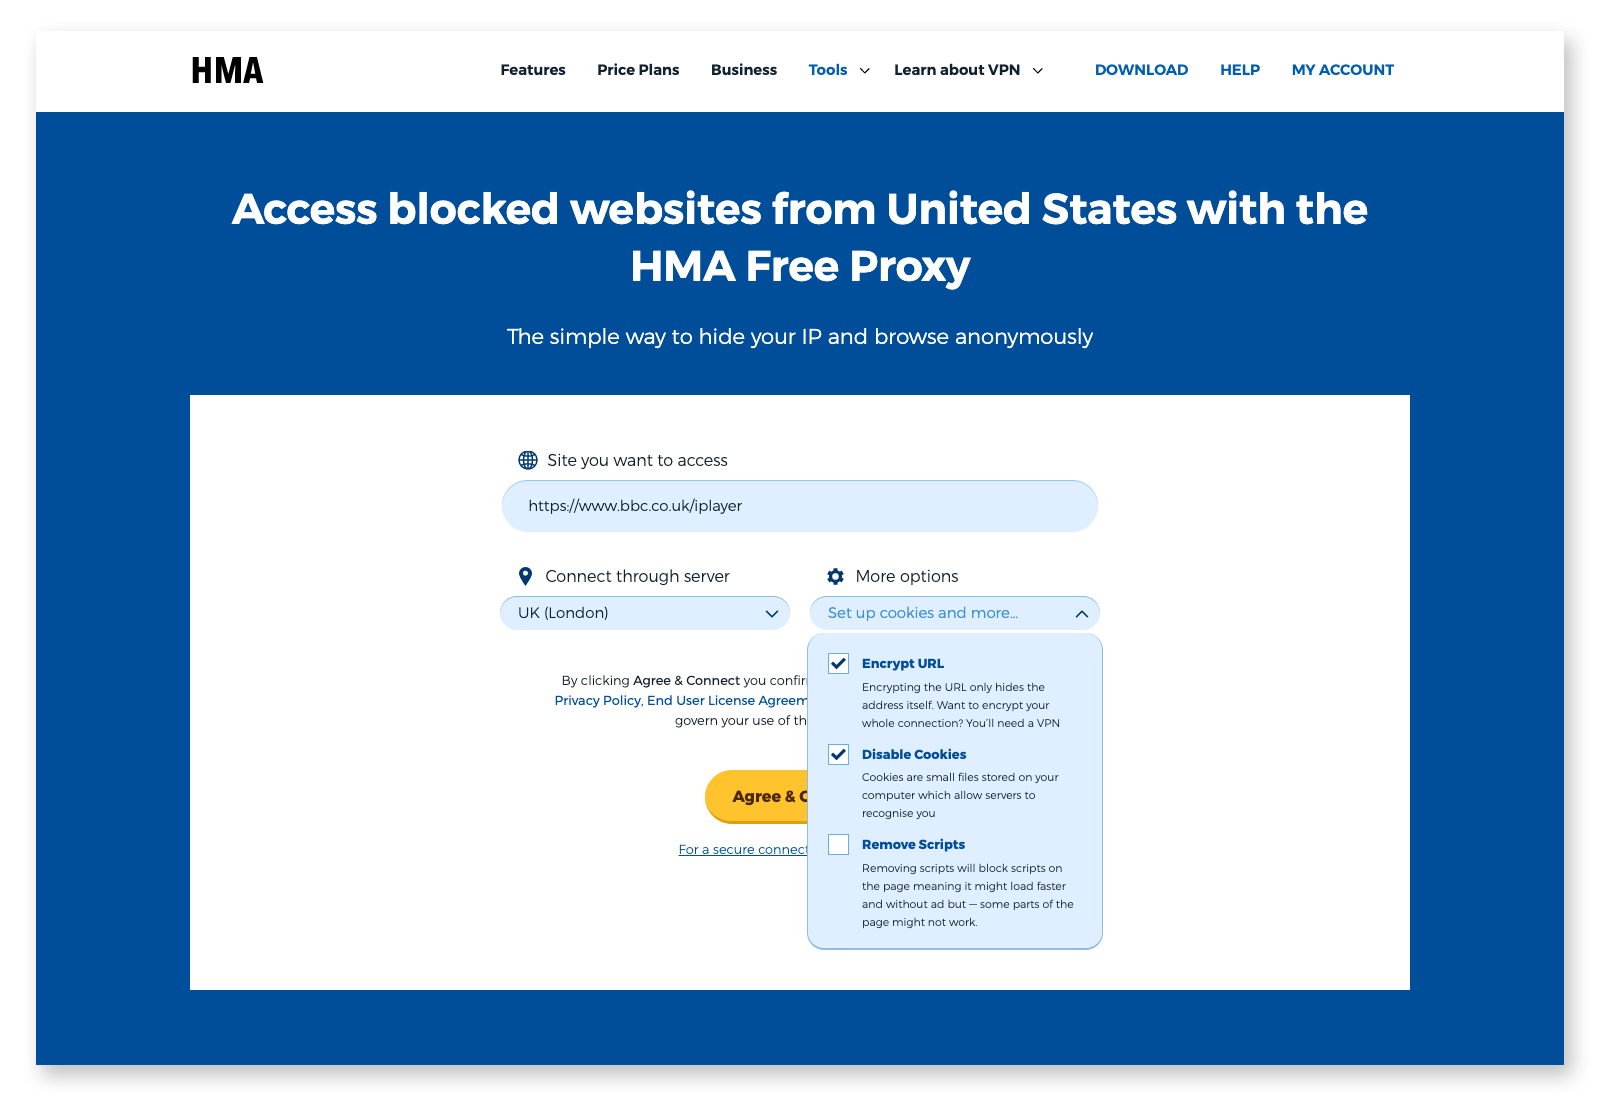 With the HMA proxy, you can unblock some sites from home, school, or work.